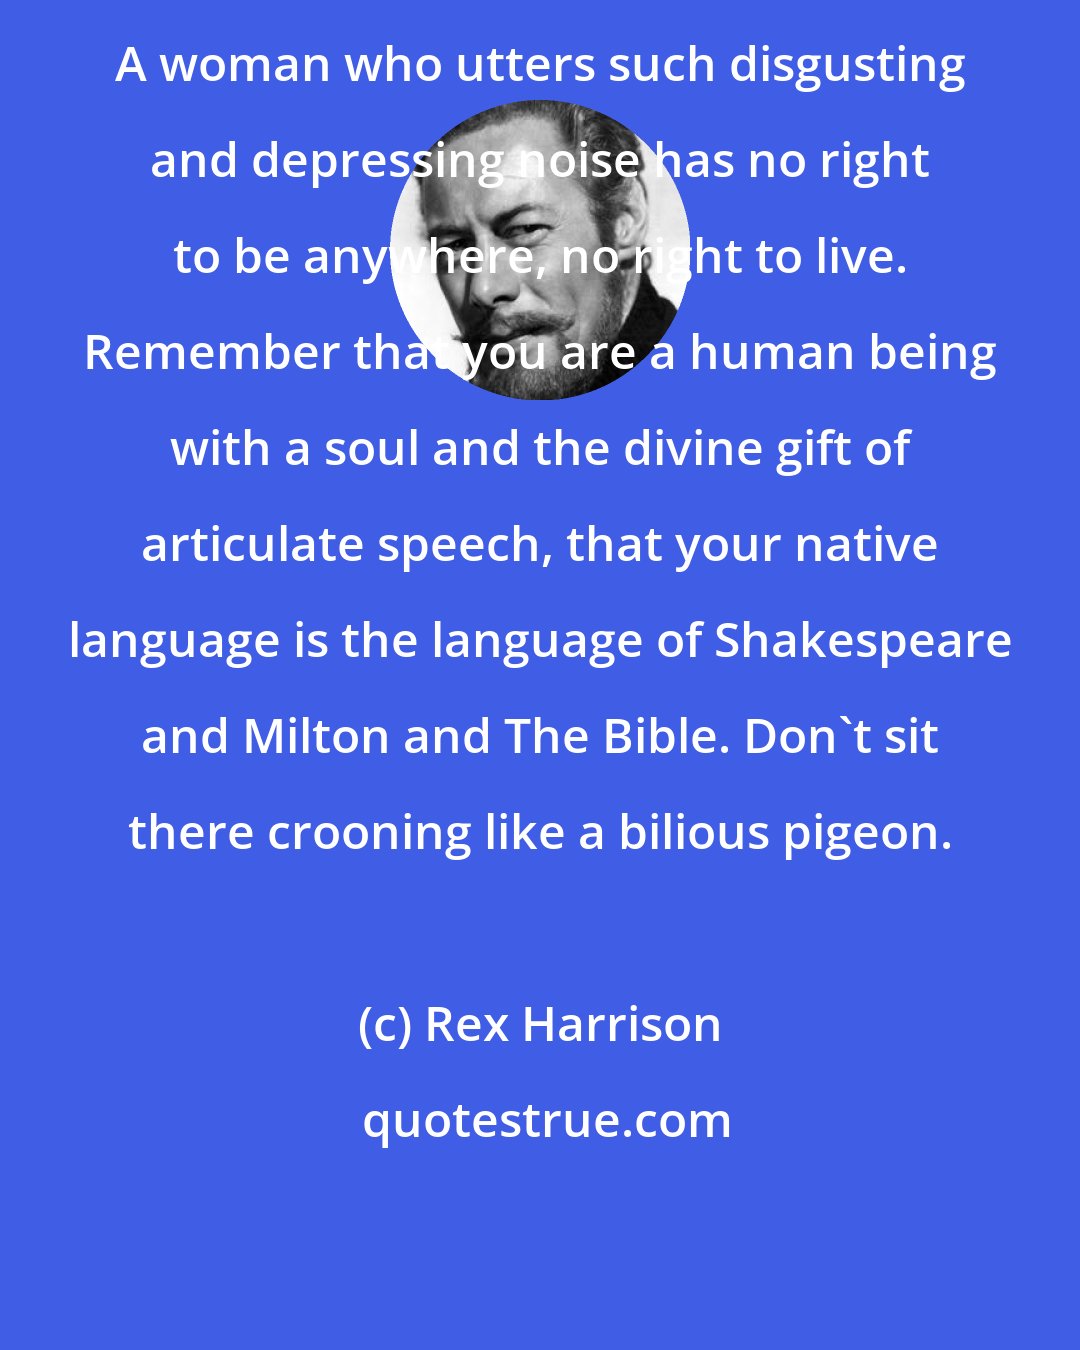 Rex Harrison: A woman who utters such disgusting and depressing noise has no right to be anywhere, no right to live. Remember that you are a human being with a soul and the divine gift of articulate speech, that your native language is the language of Shakespeare and Milton and The Bible. Don't sit there crooning like a bilious pigeon.